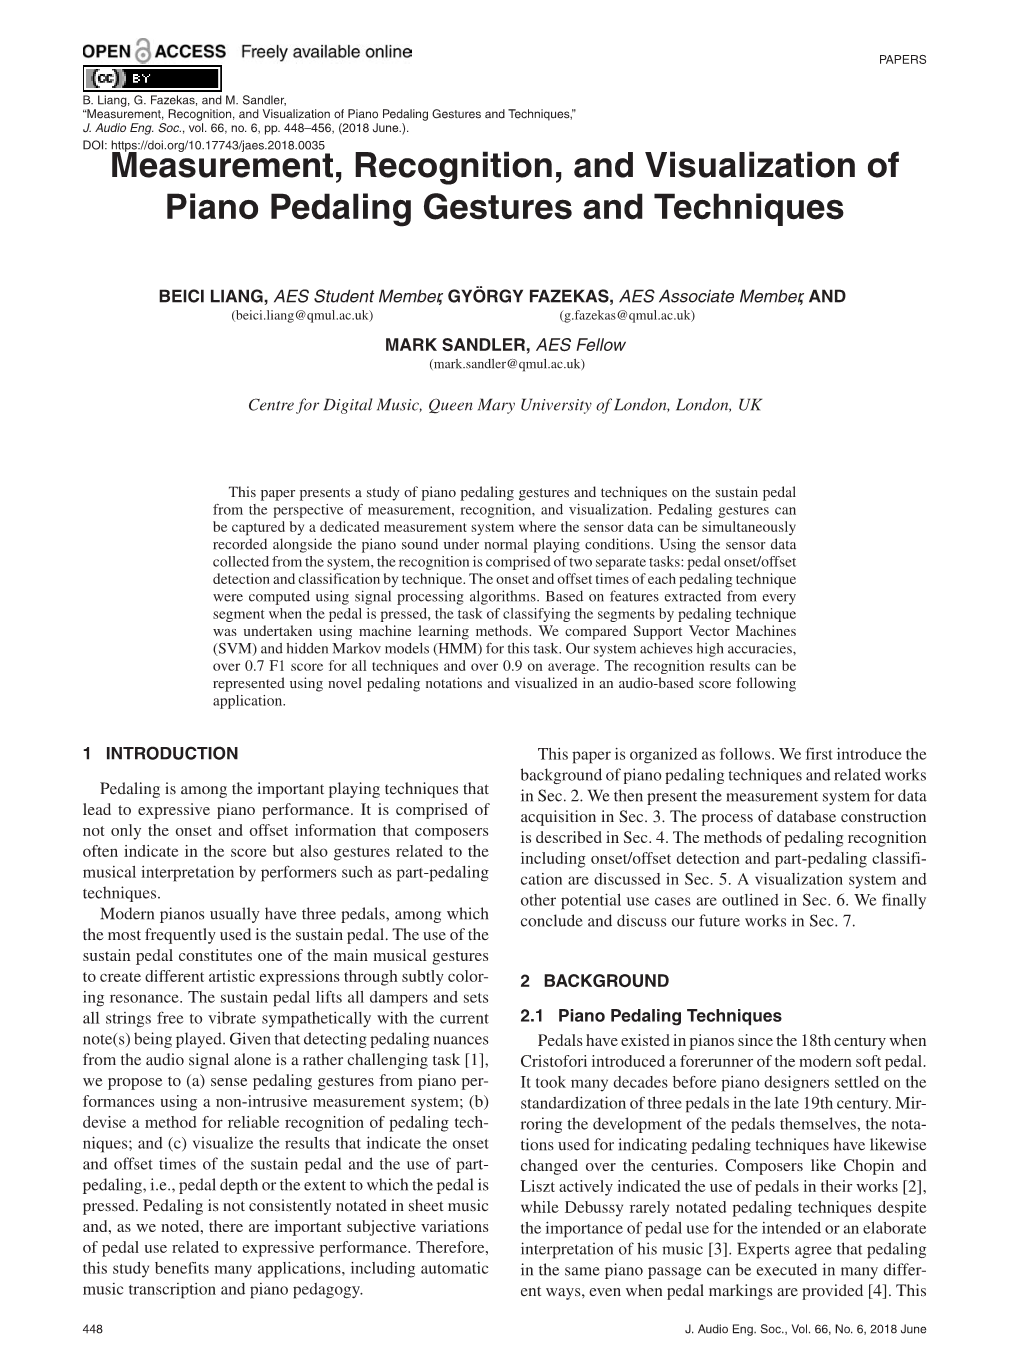 Measurement, Recognition, and Visualization of Piano Pedaling Gestures and Techniques,” J